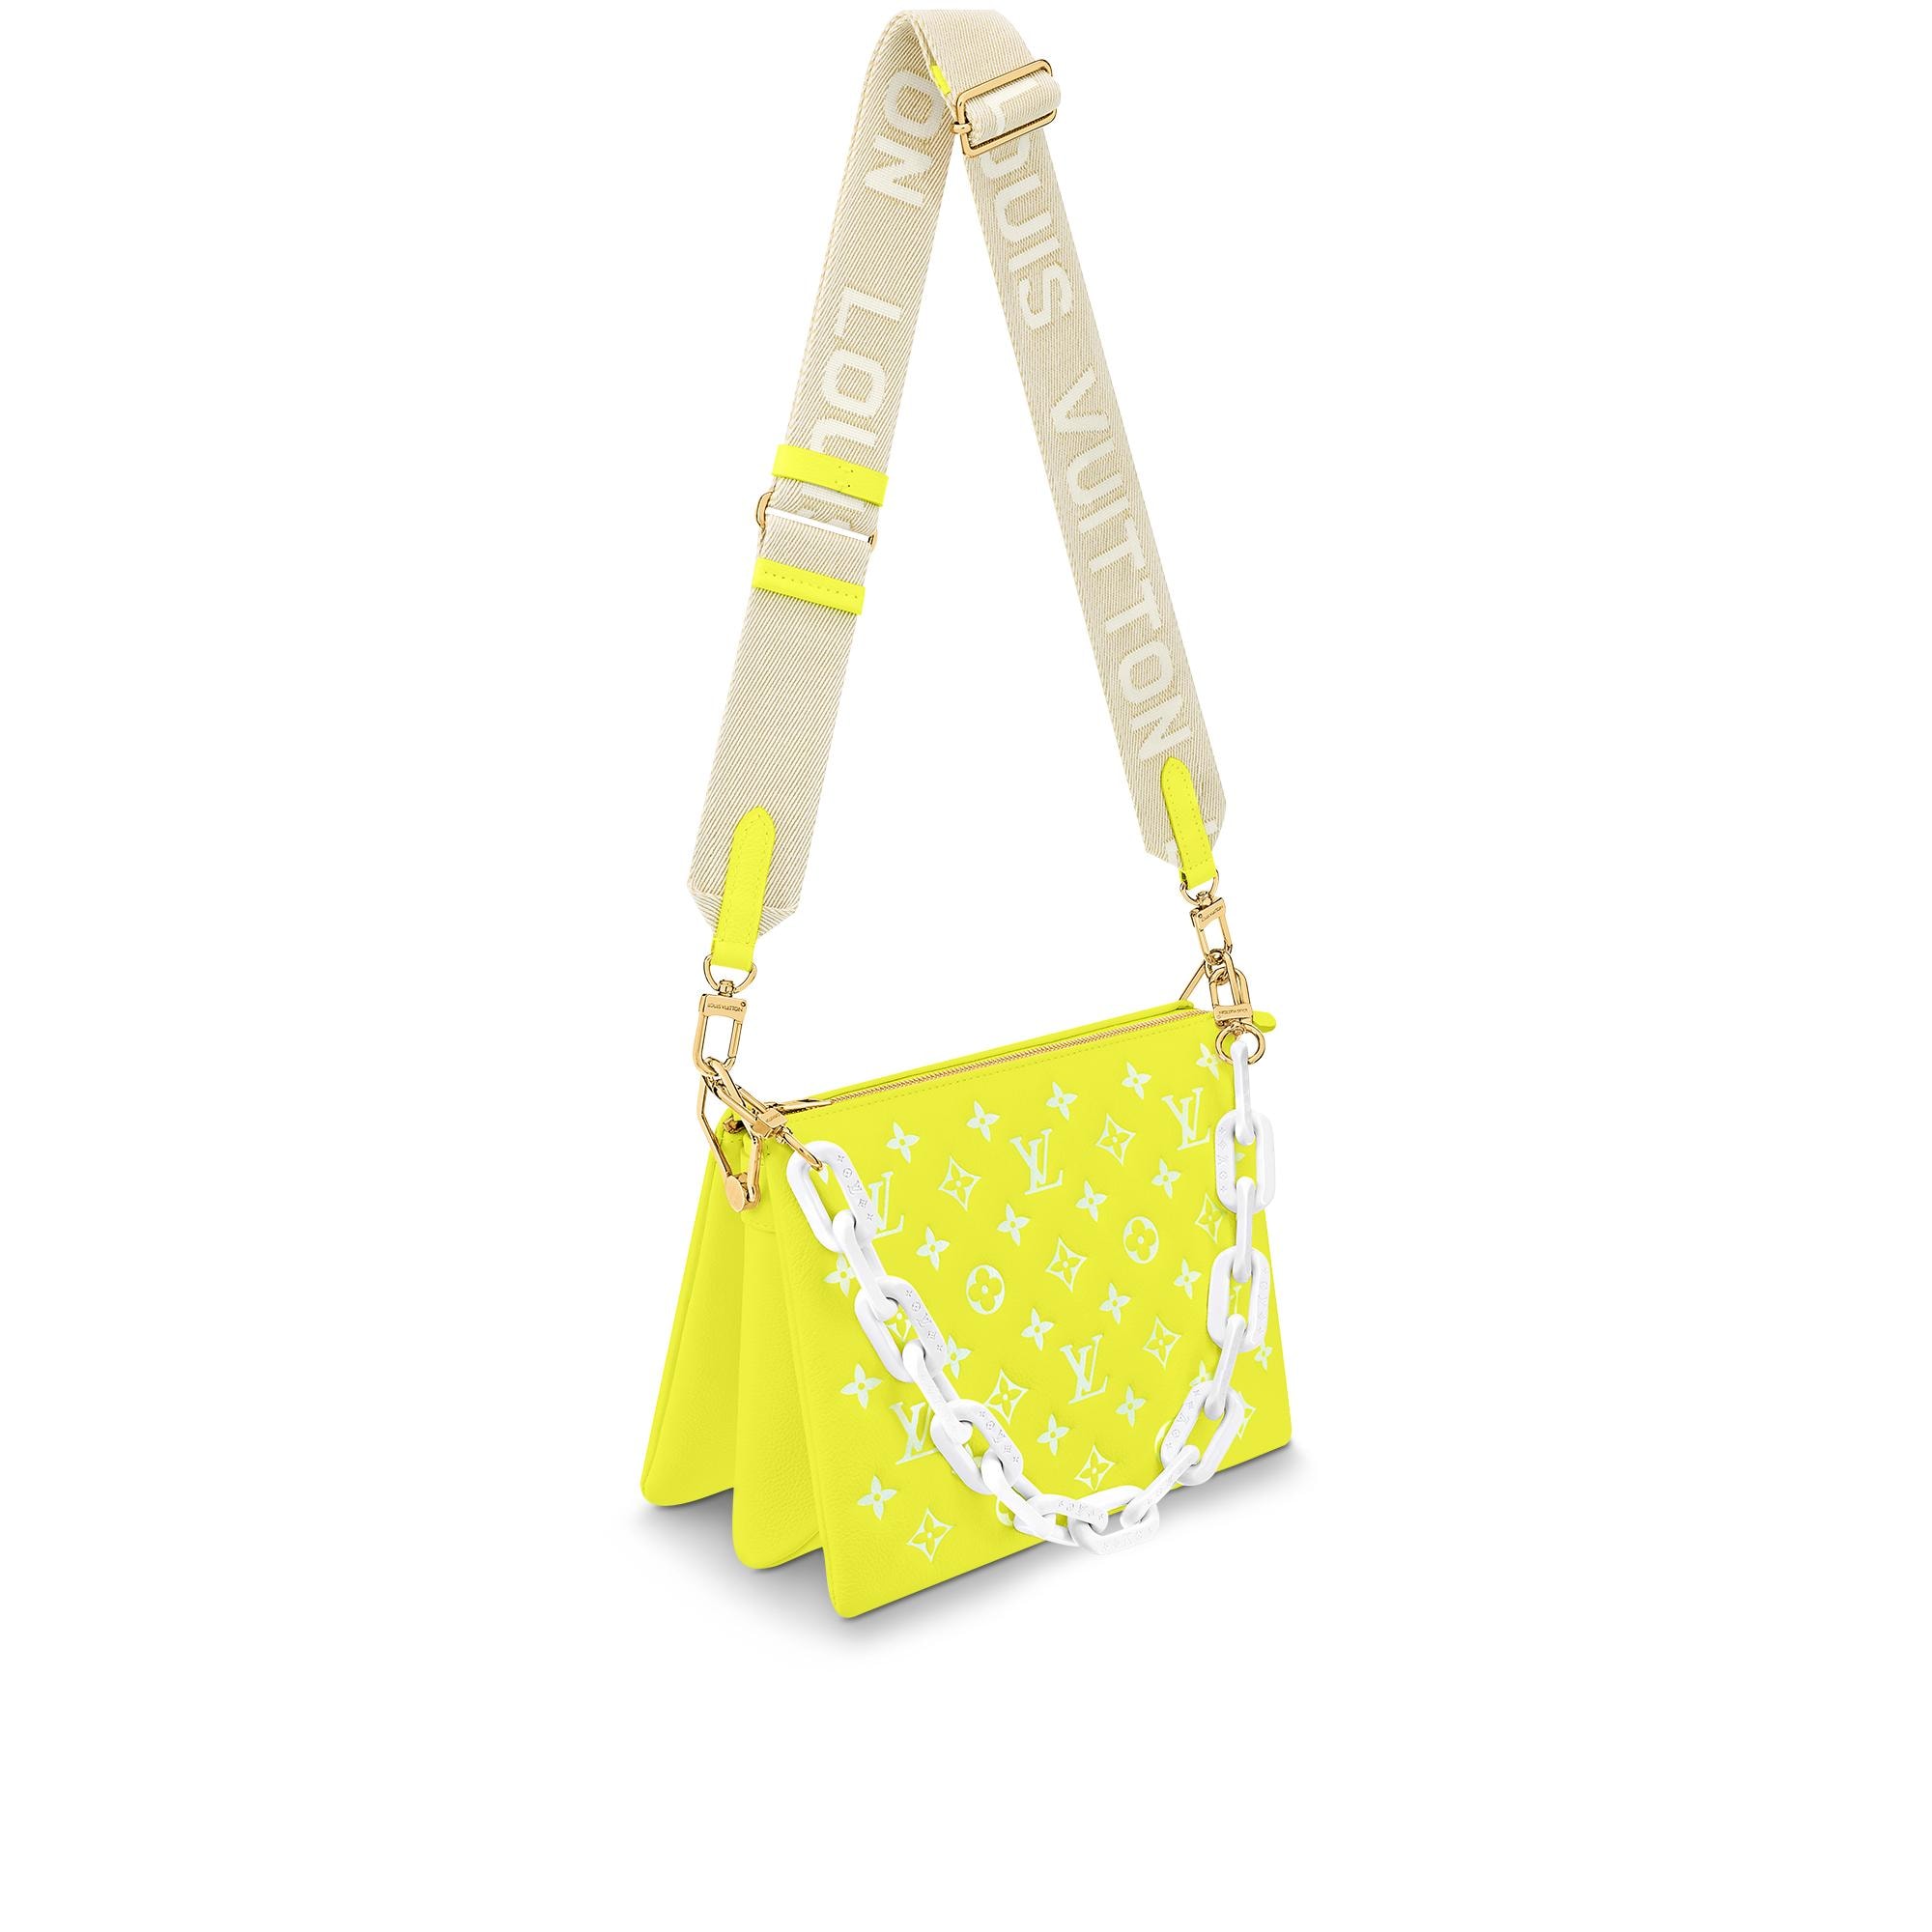 Louis Vuitton on X: Mad about yellow. The #LouisVuitton NéoNoé is